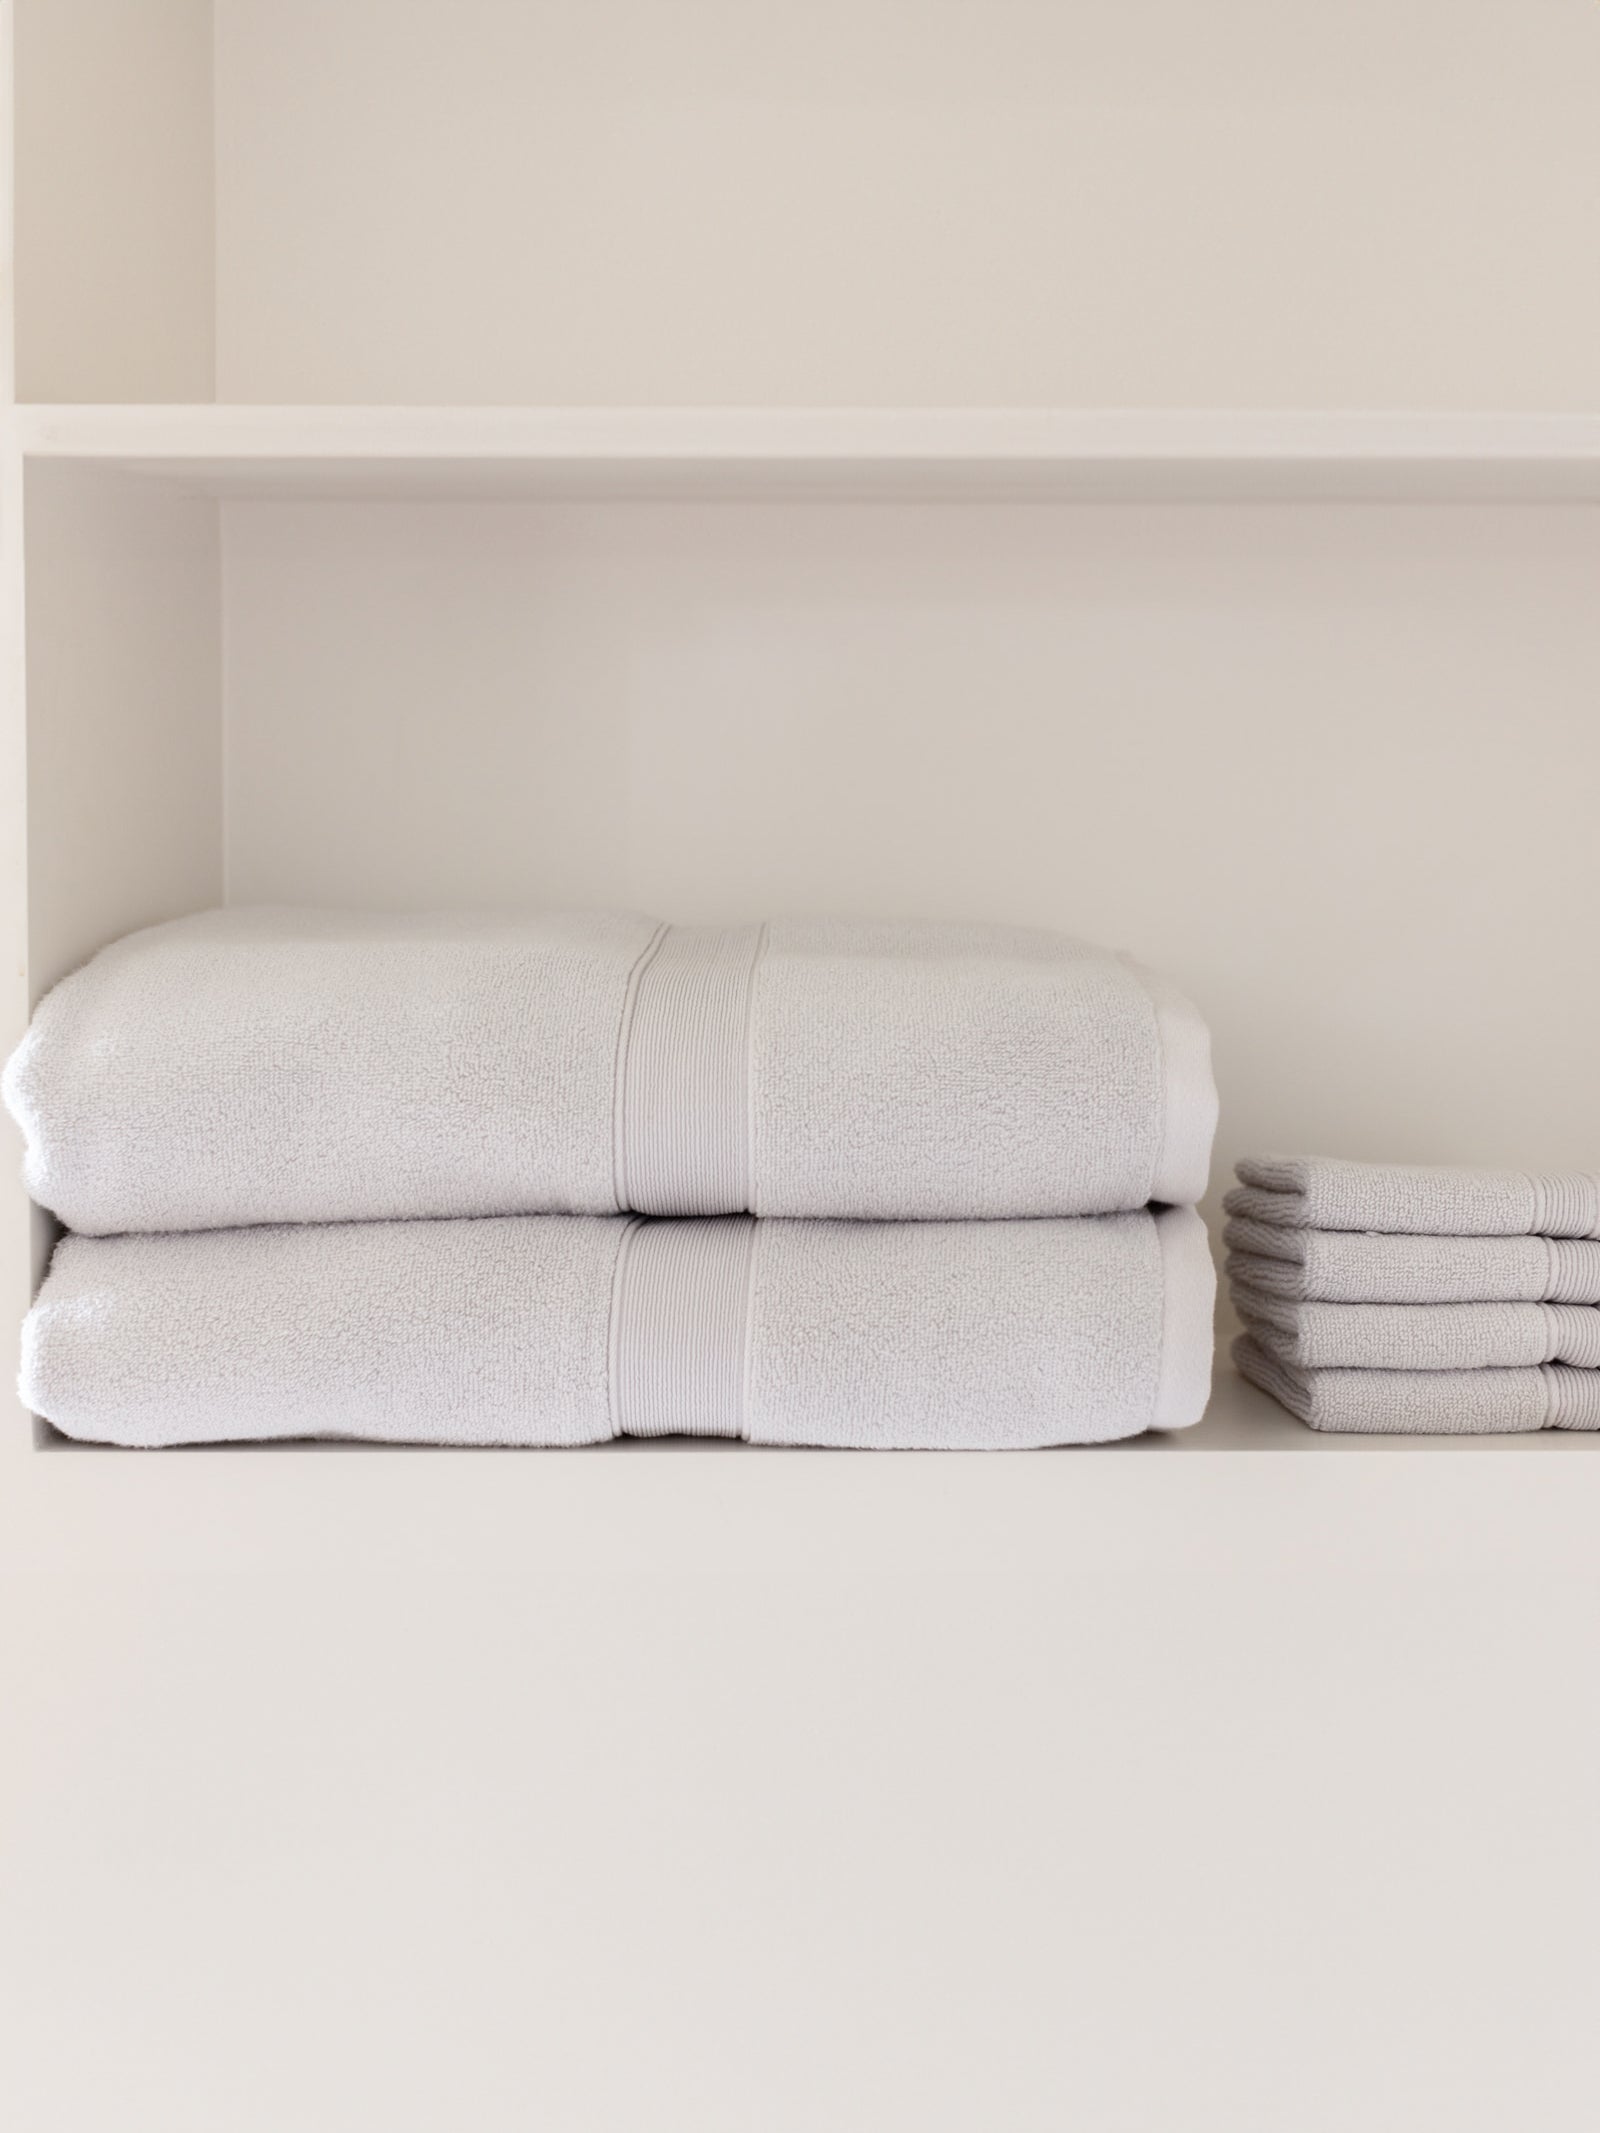 Light grey luxe bath sheets and washcloths on shelf 